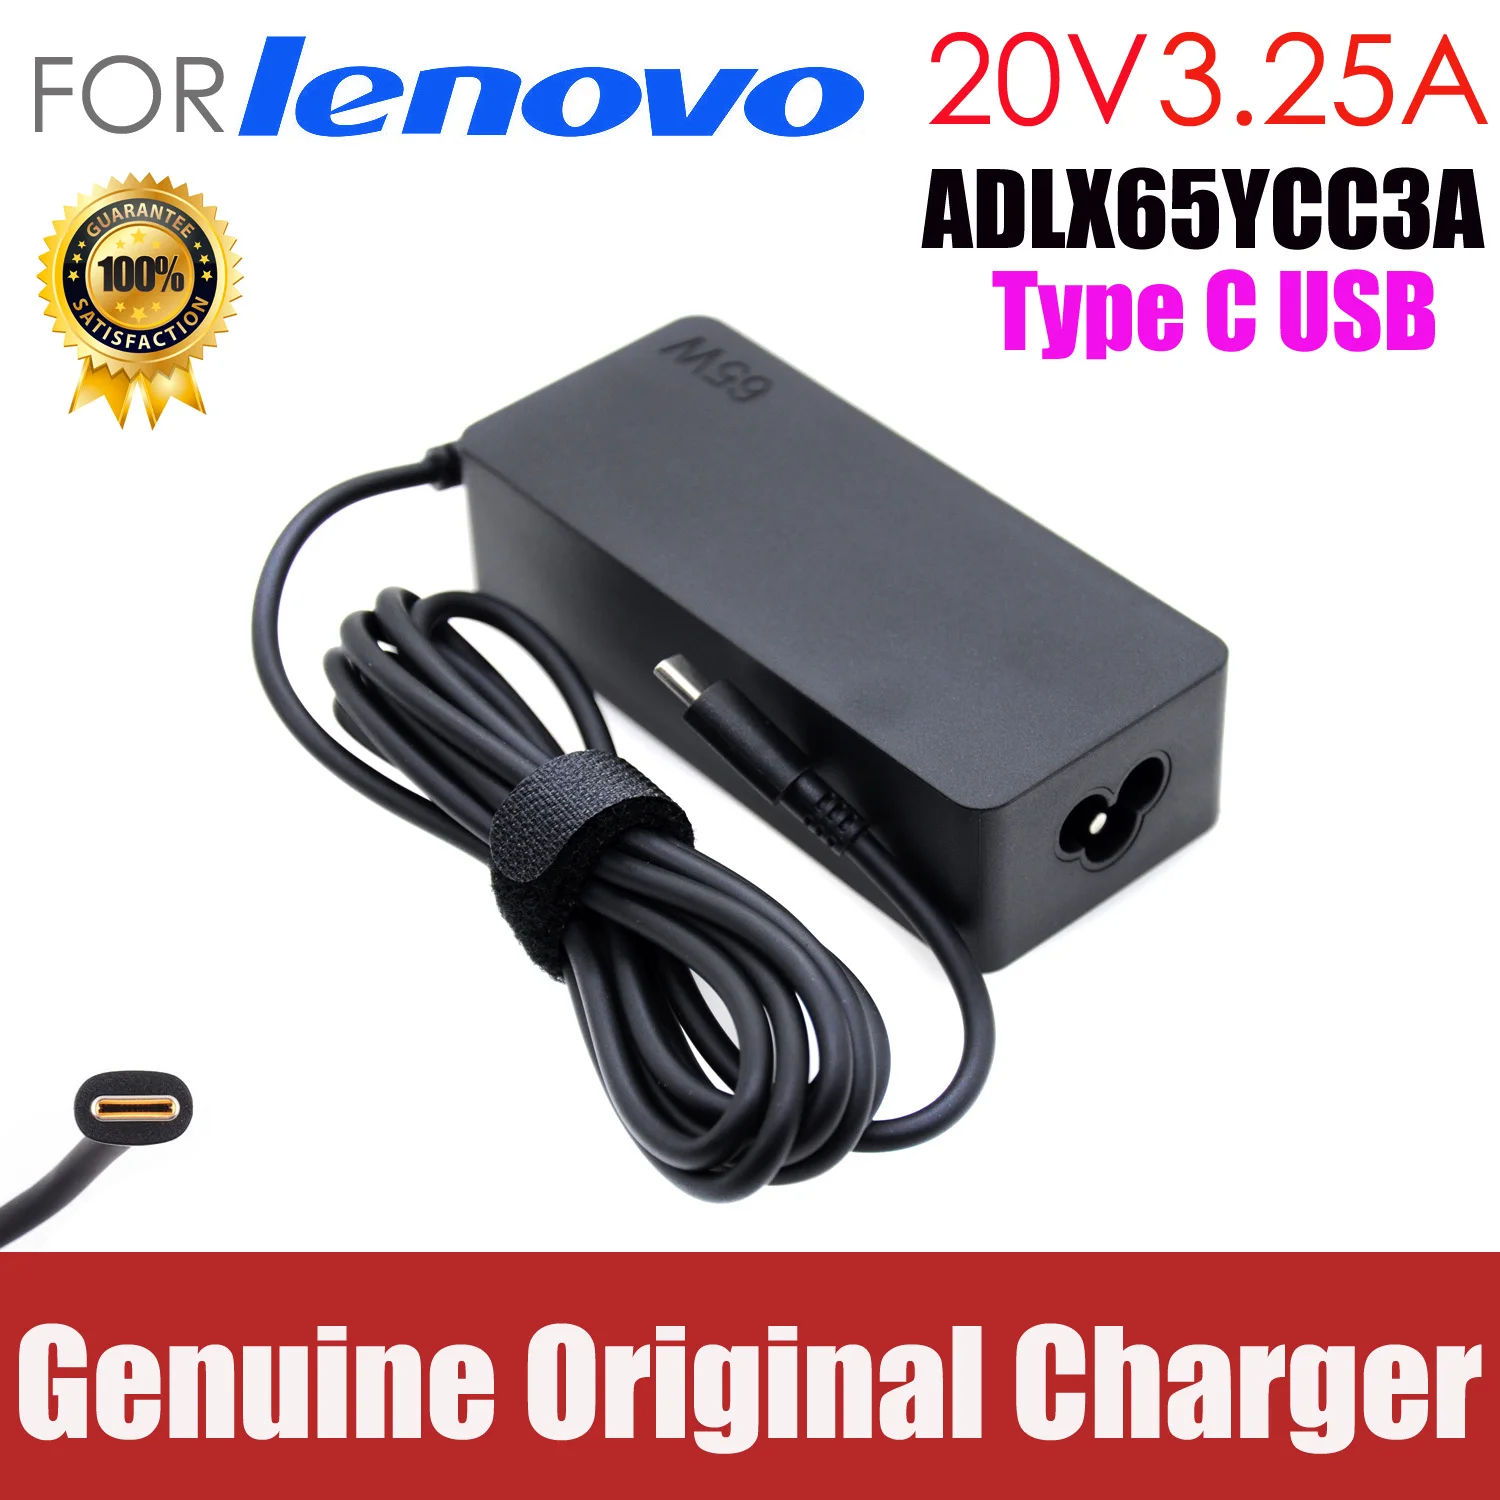 

Original 65W TypeC AC Adapter Laptop Charger for Lenovo ThinkPad S3 T470 T480 T480S T490S T570 P51S P52s R480 R490 R590 T580